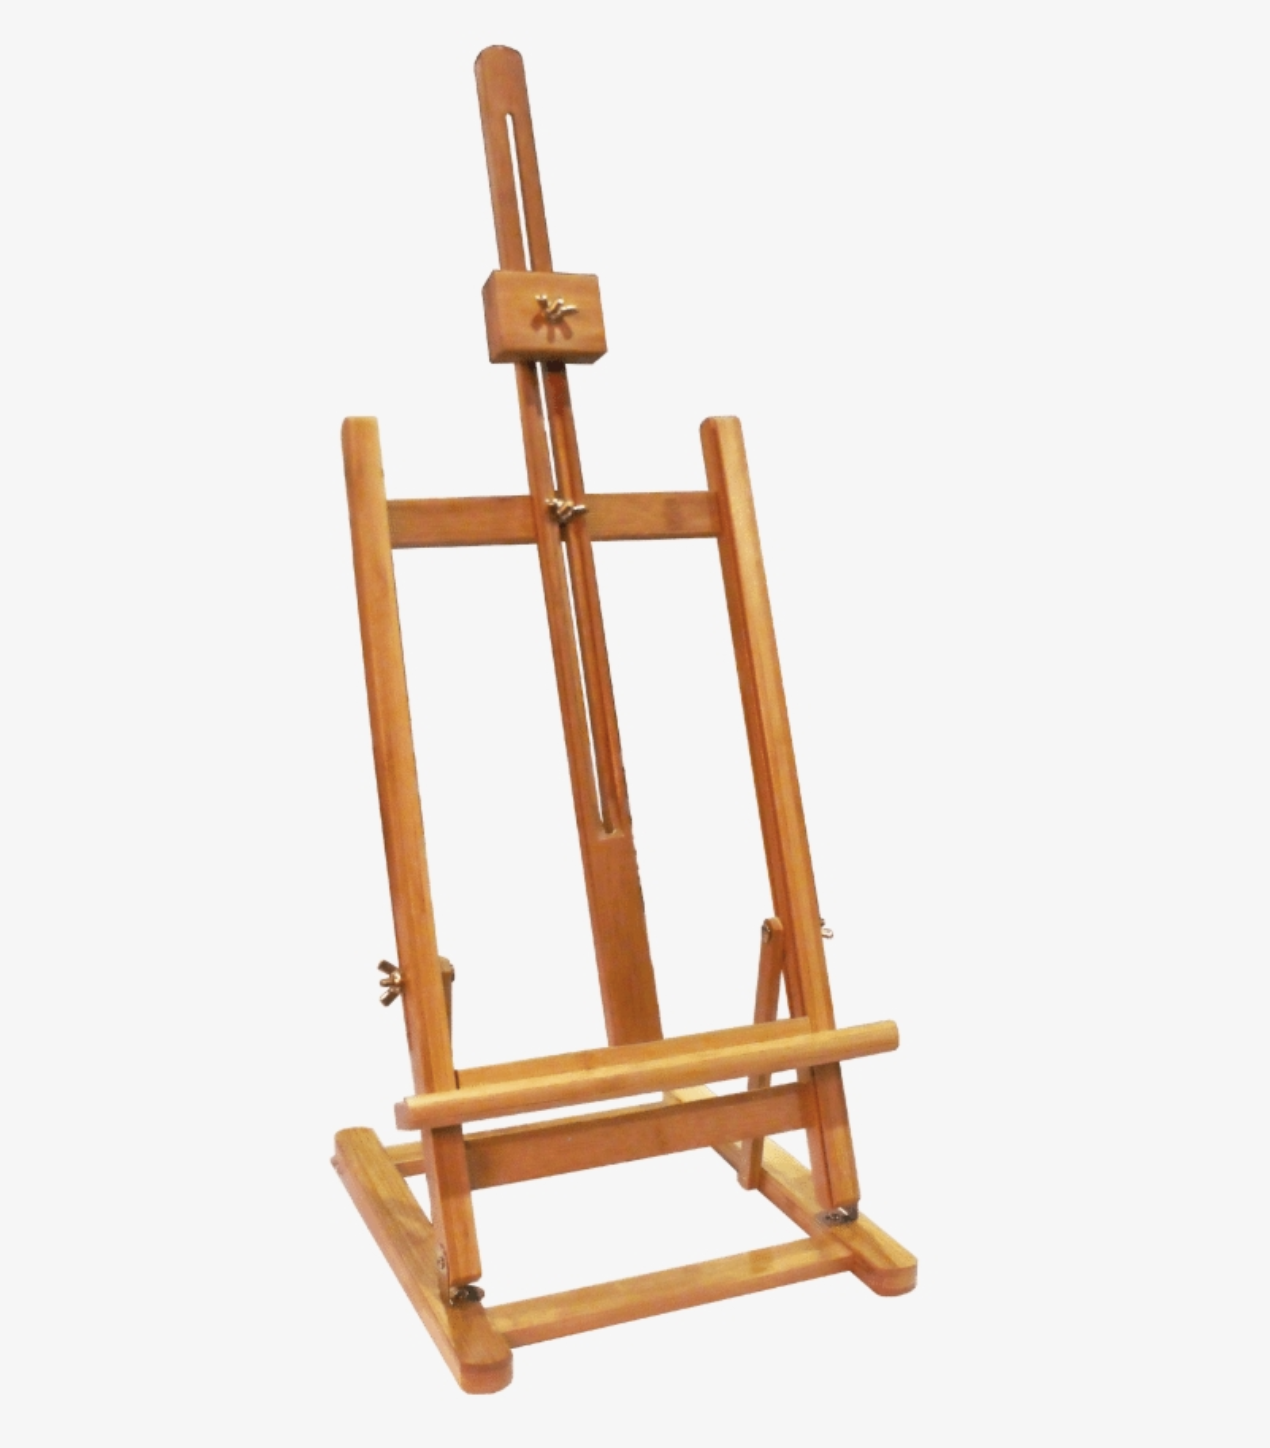 Cappelletto : Professional Restoration Easel : Electric With Remote Control  (Dta)